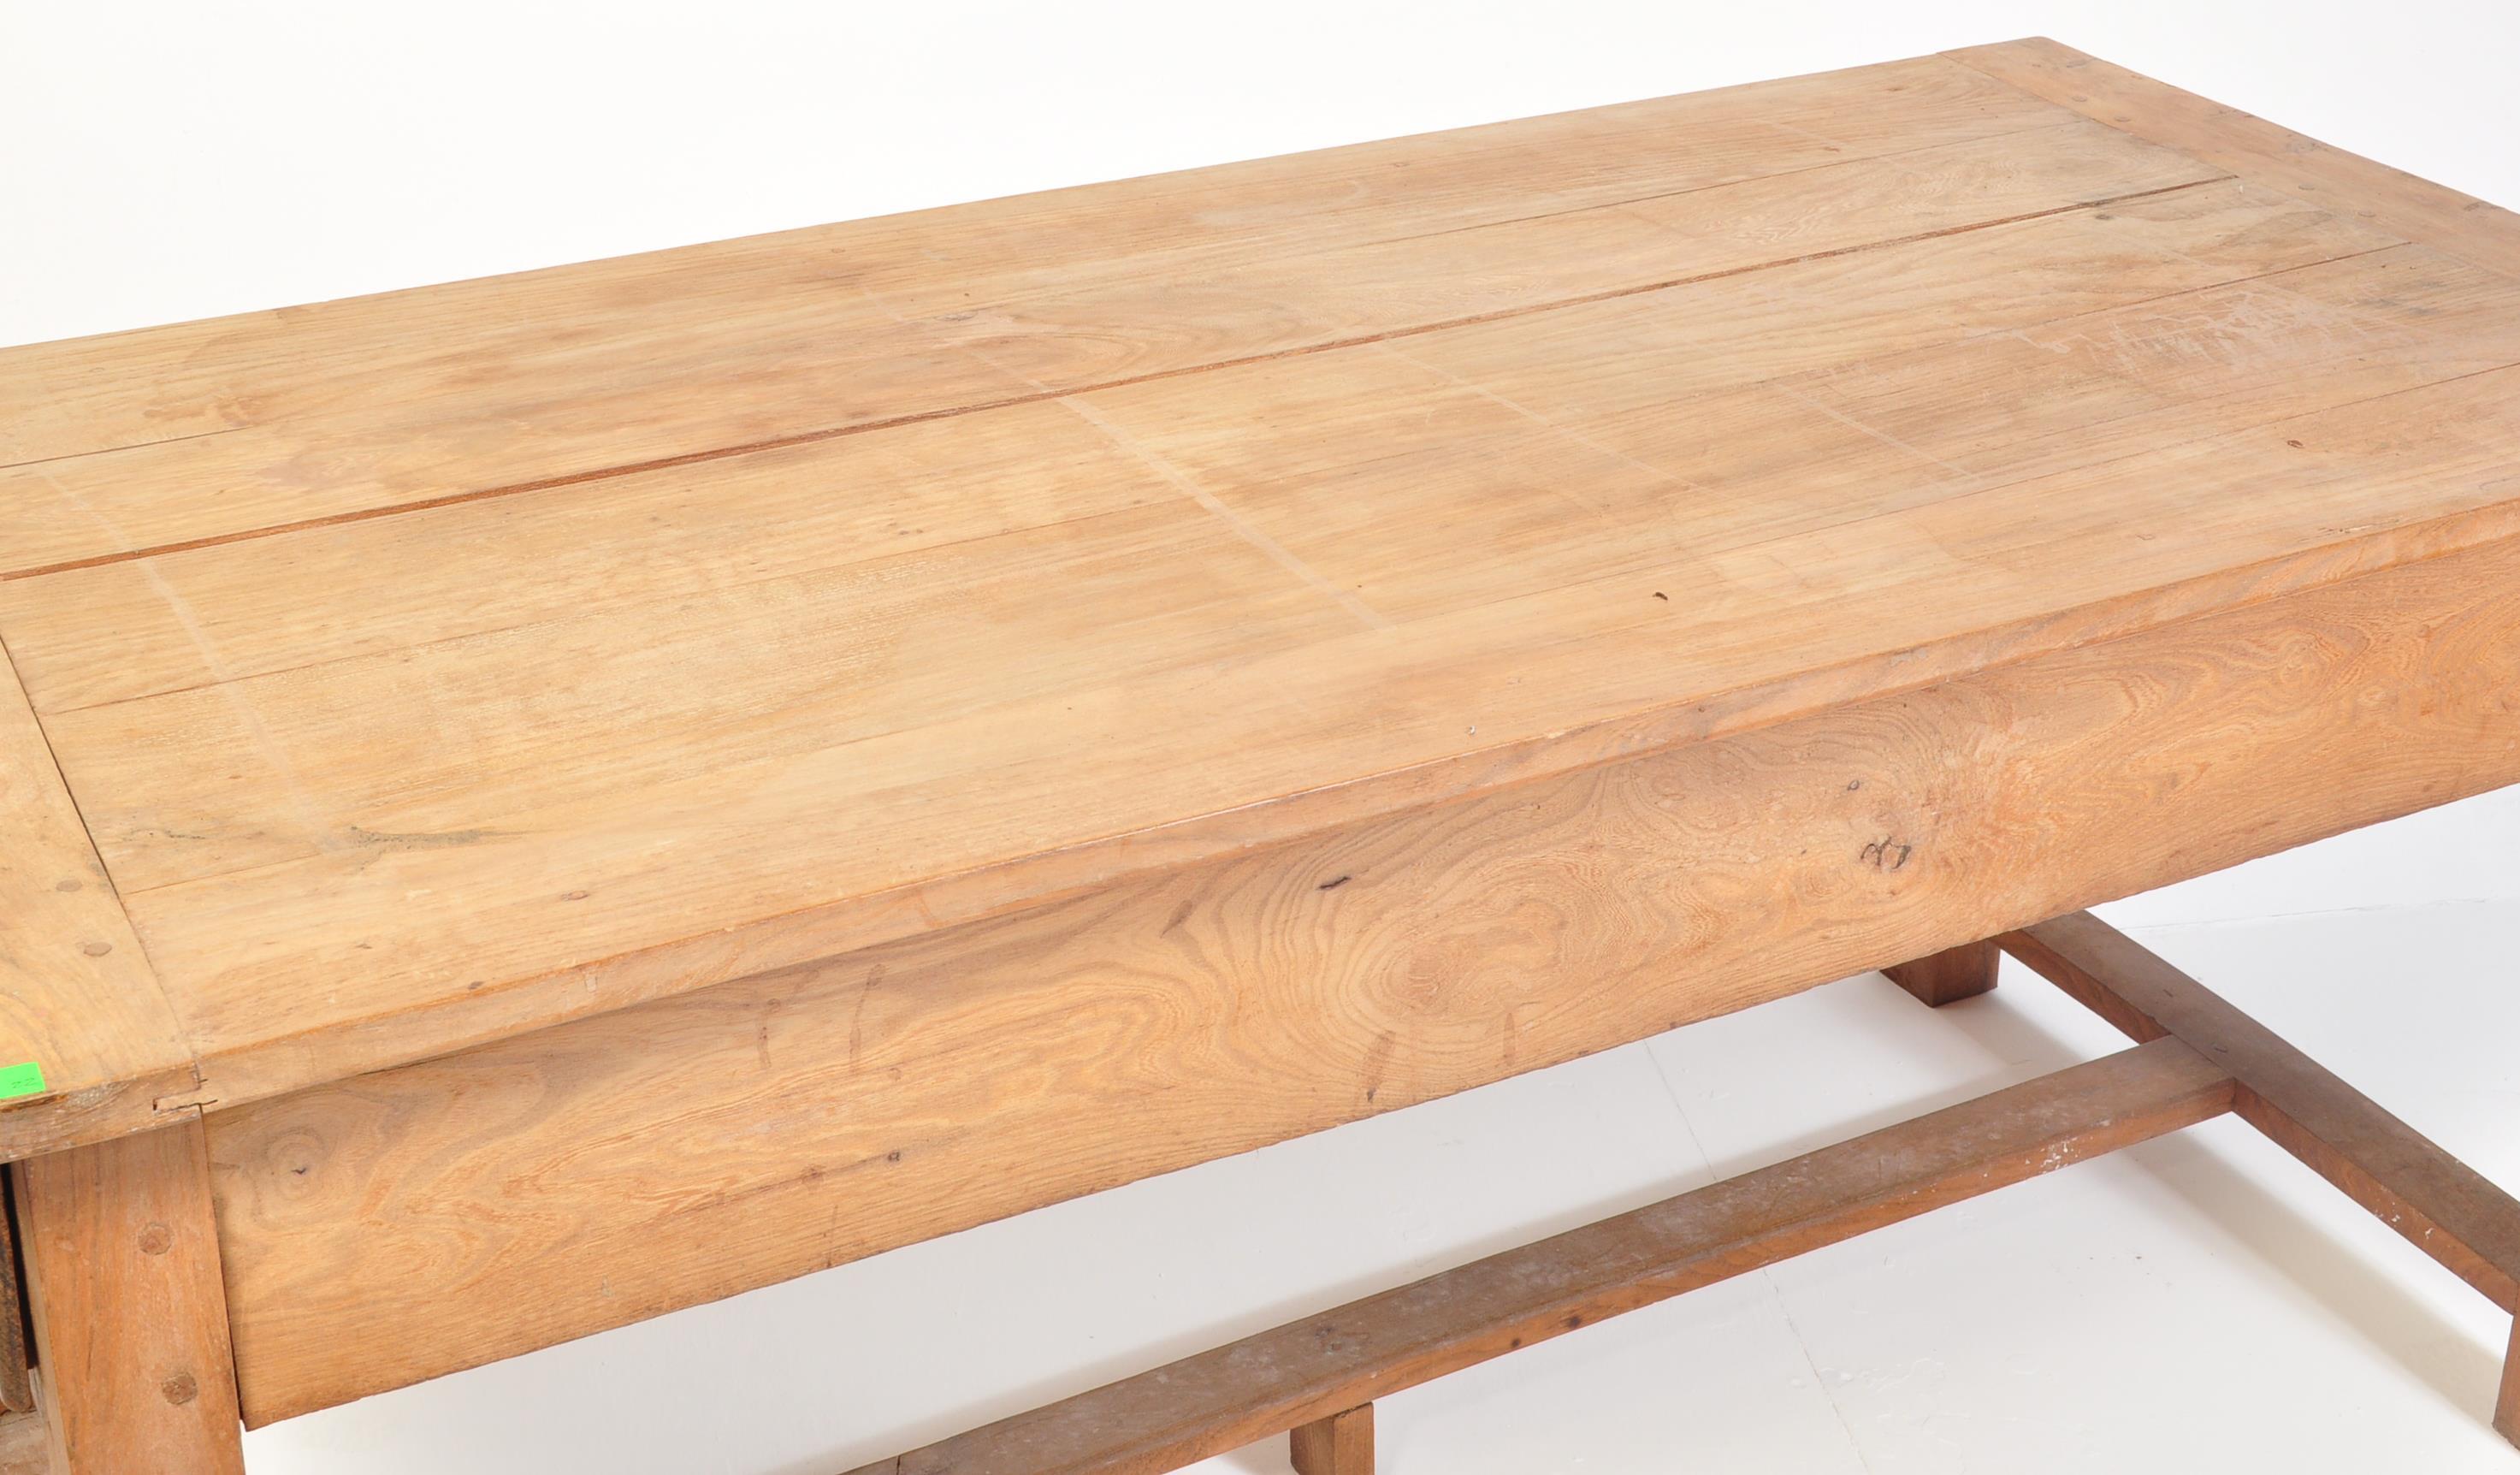 LATE 19TH CENTURY FRENCH CHERRY WOOD FARMHOUSE TABLE - Image 3 of 6